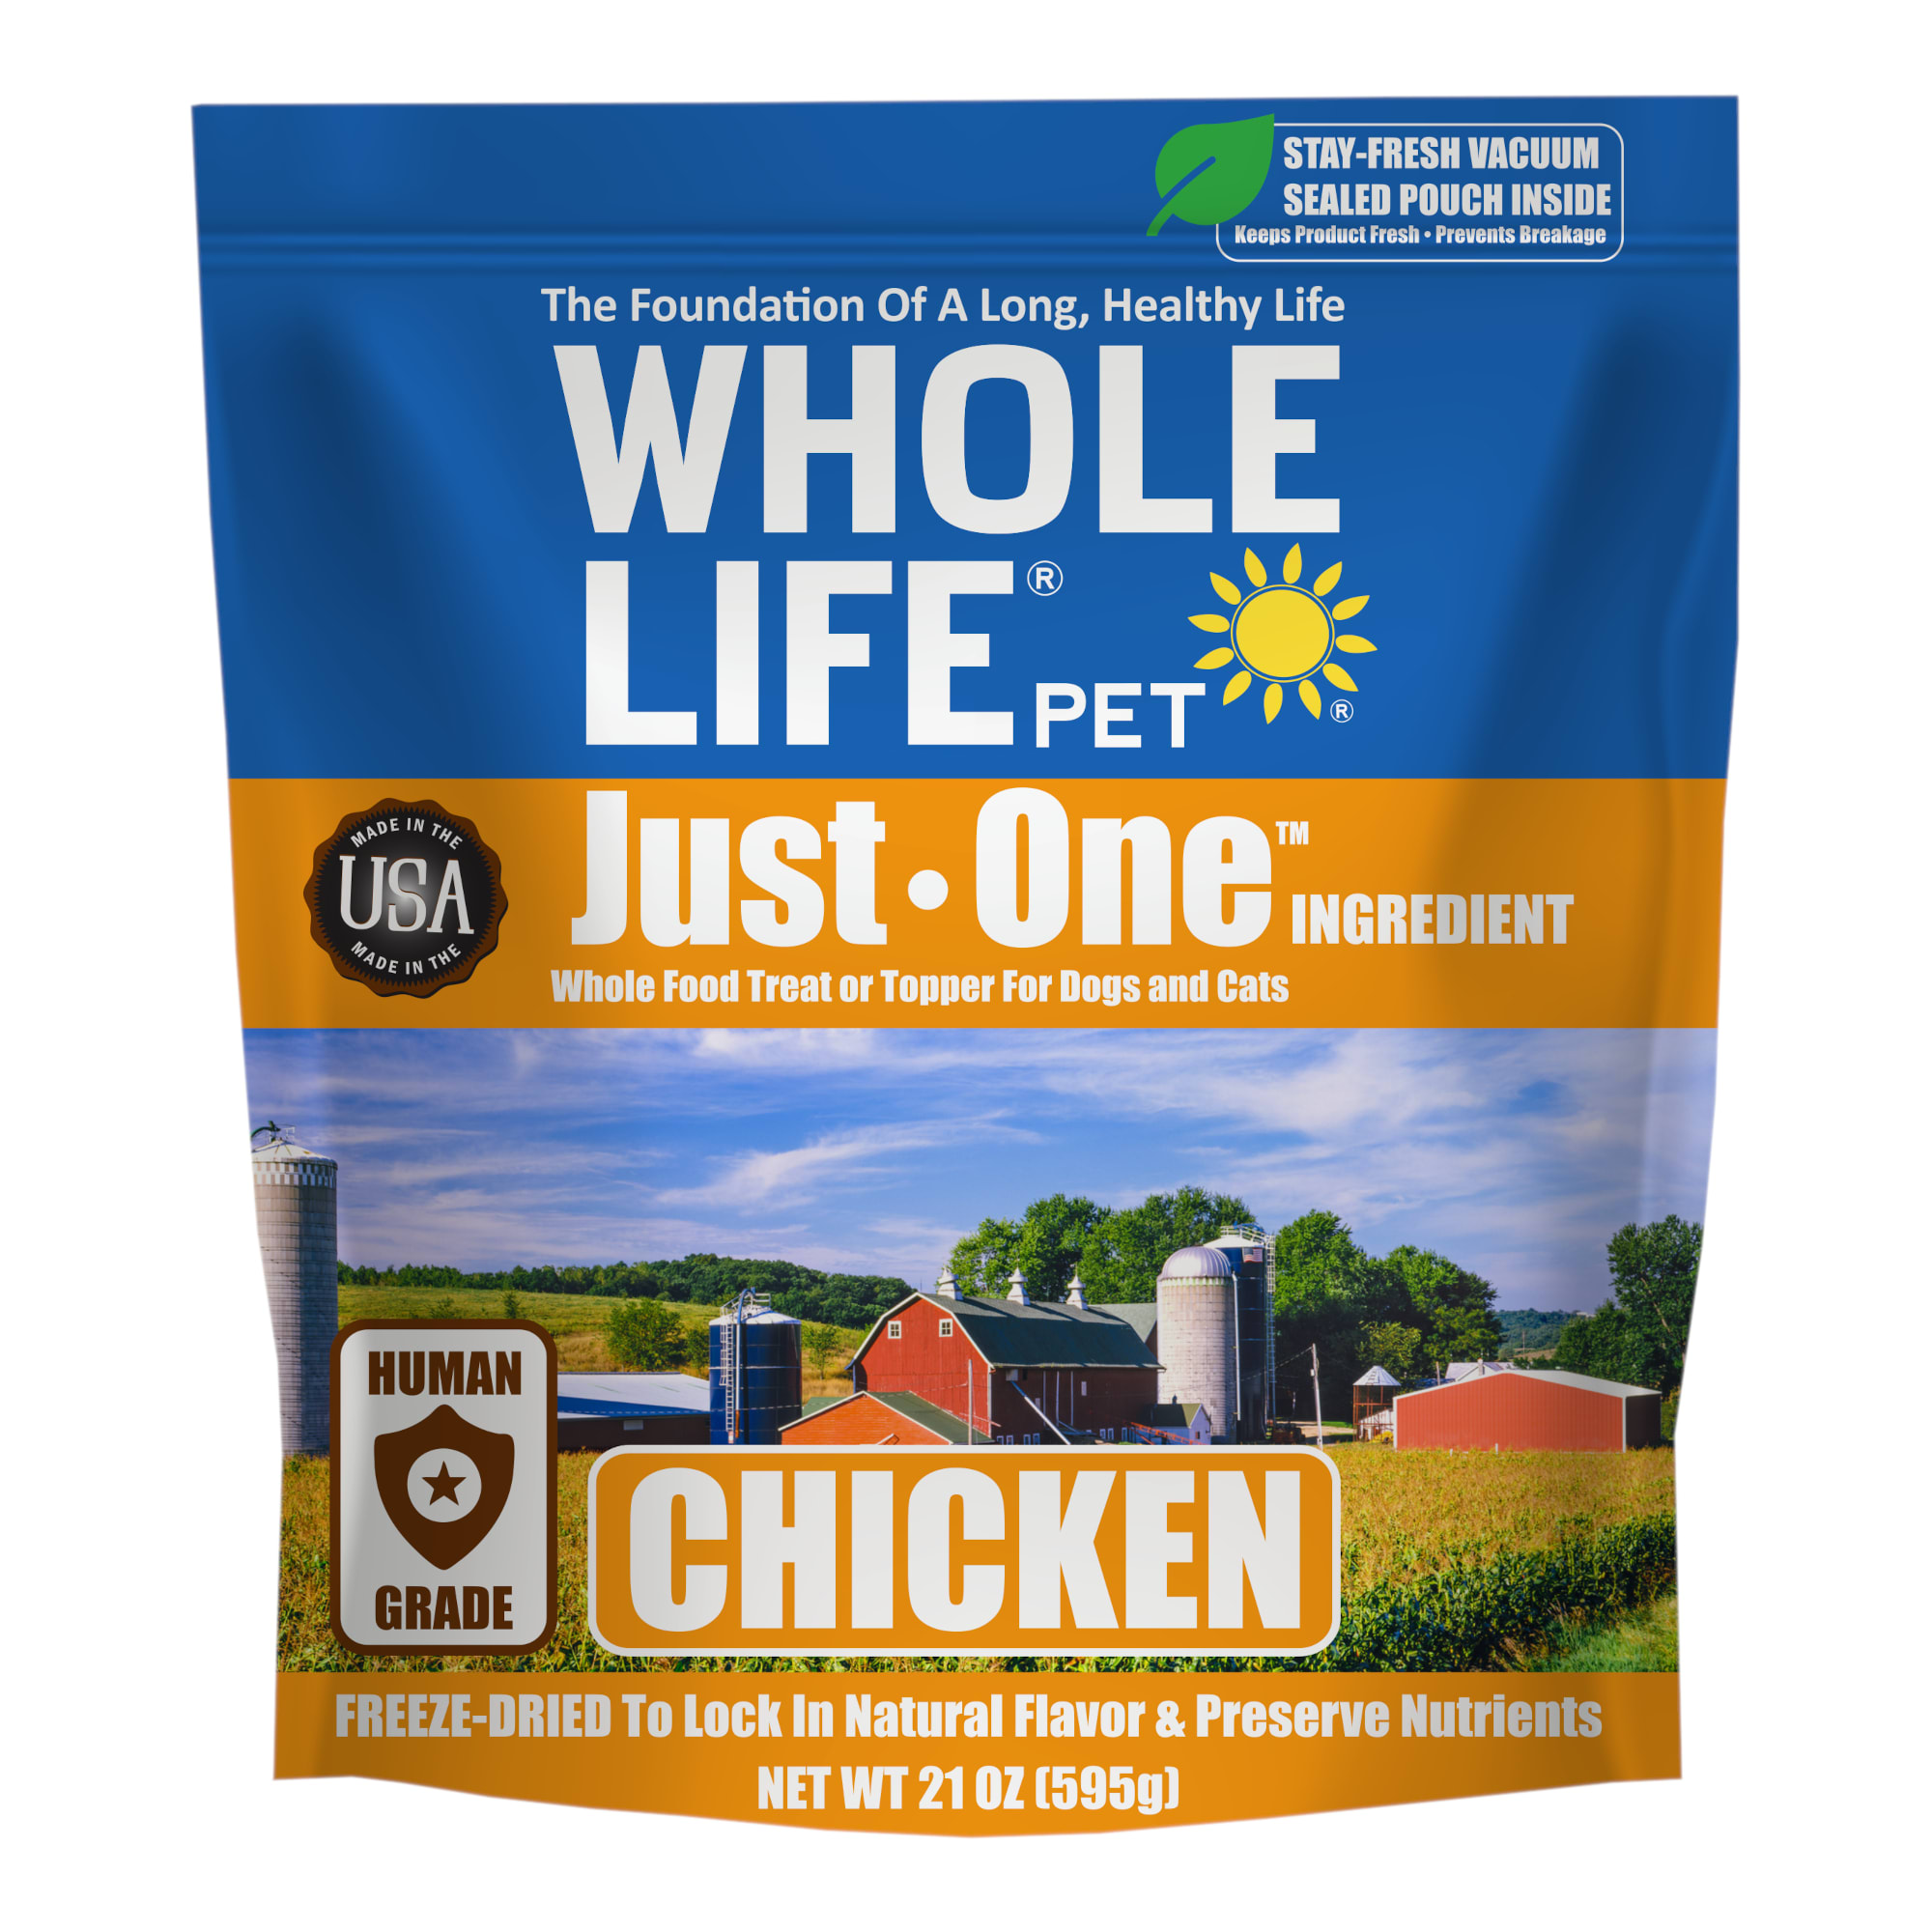 Whole Life Pet Just One Freeze Dried Pure Chicken Breast Whole Food Dog & Cat Treats, 21 oz.